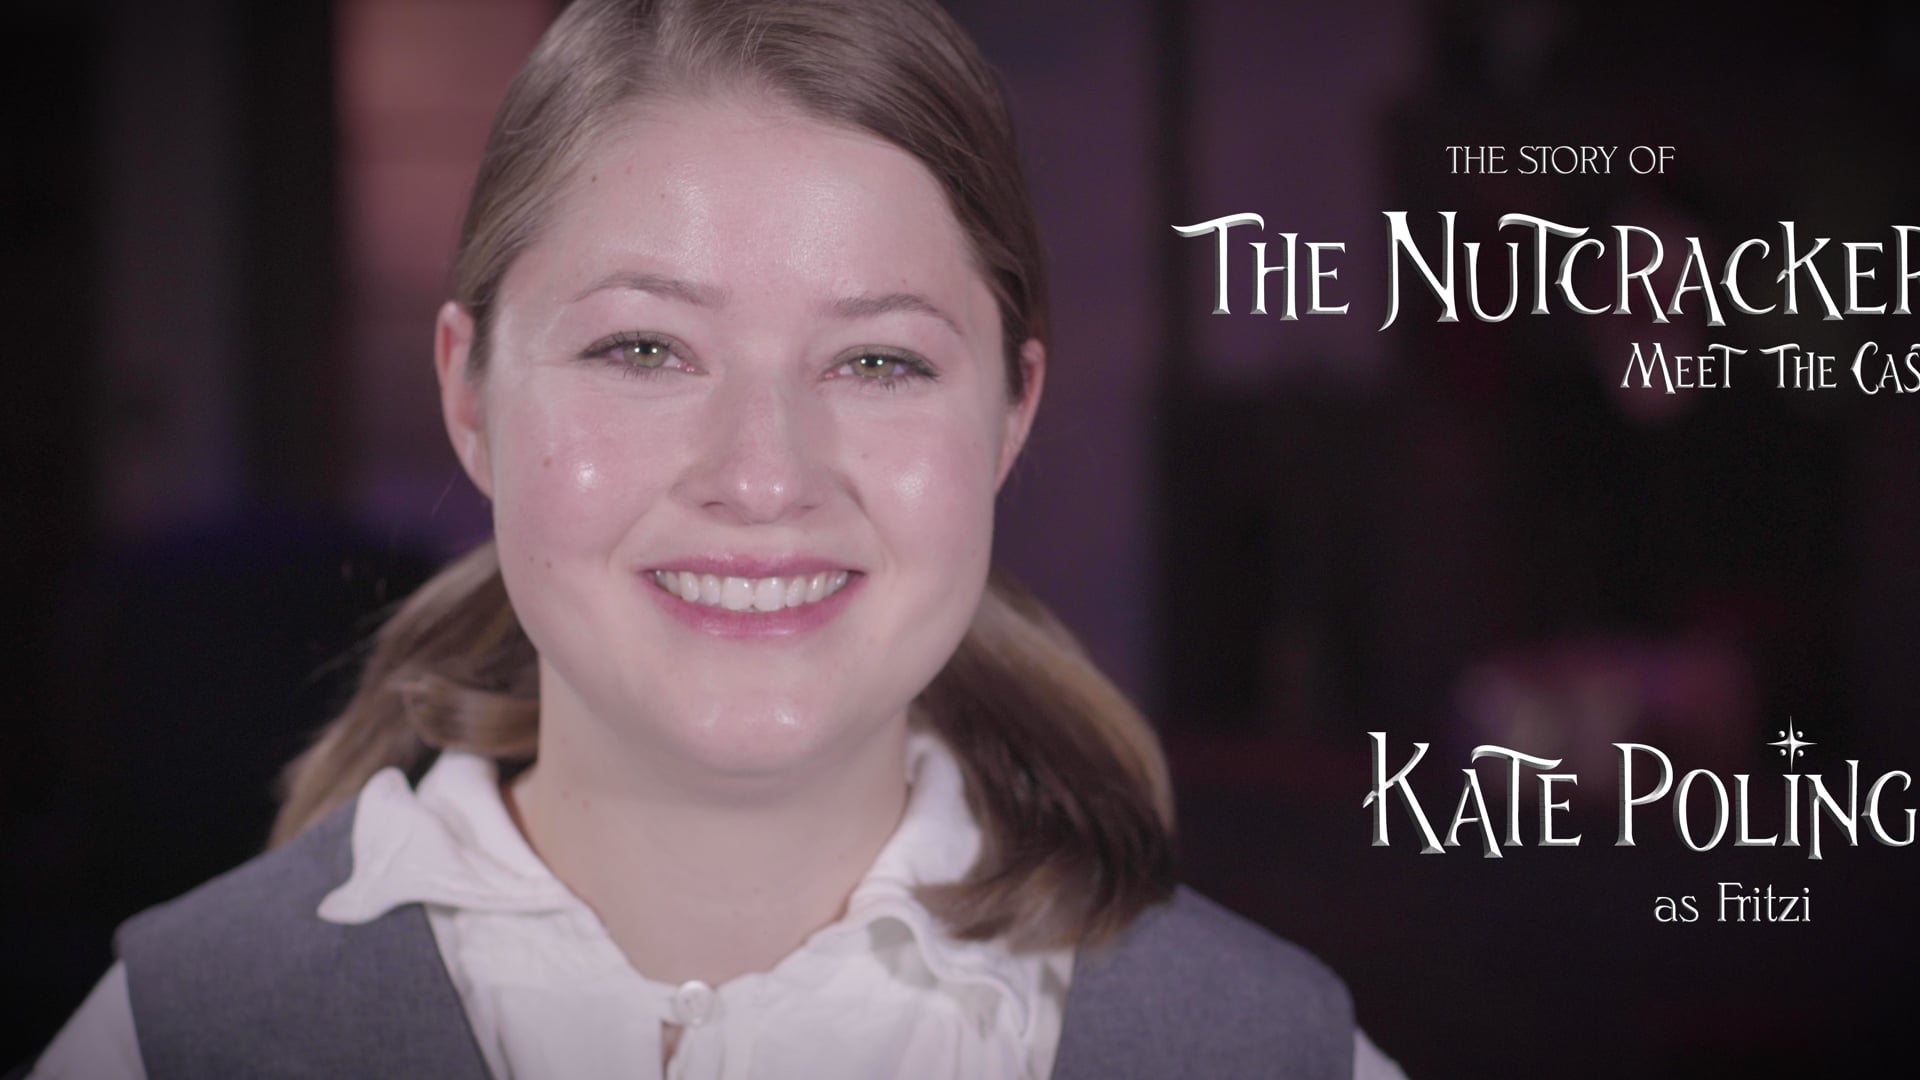 Meet the Cast of "The Story of the Nutcracker" (Kate Poling as Fritzi)